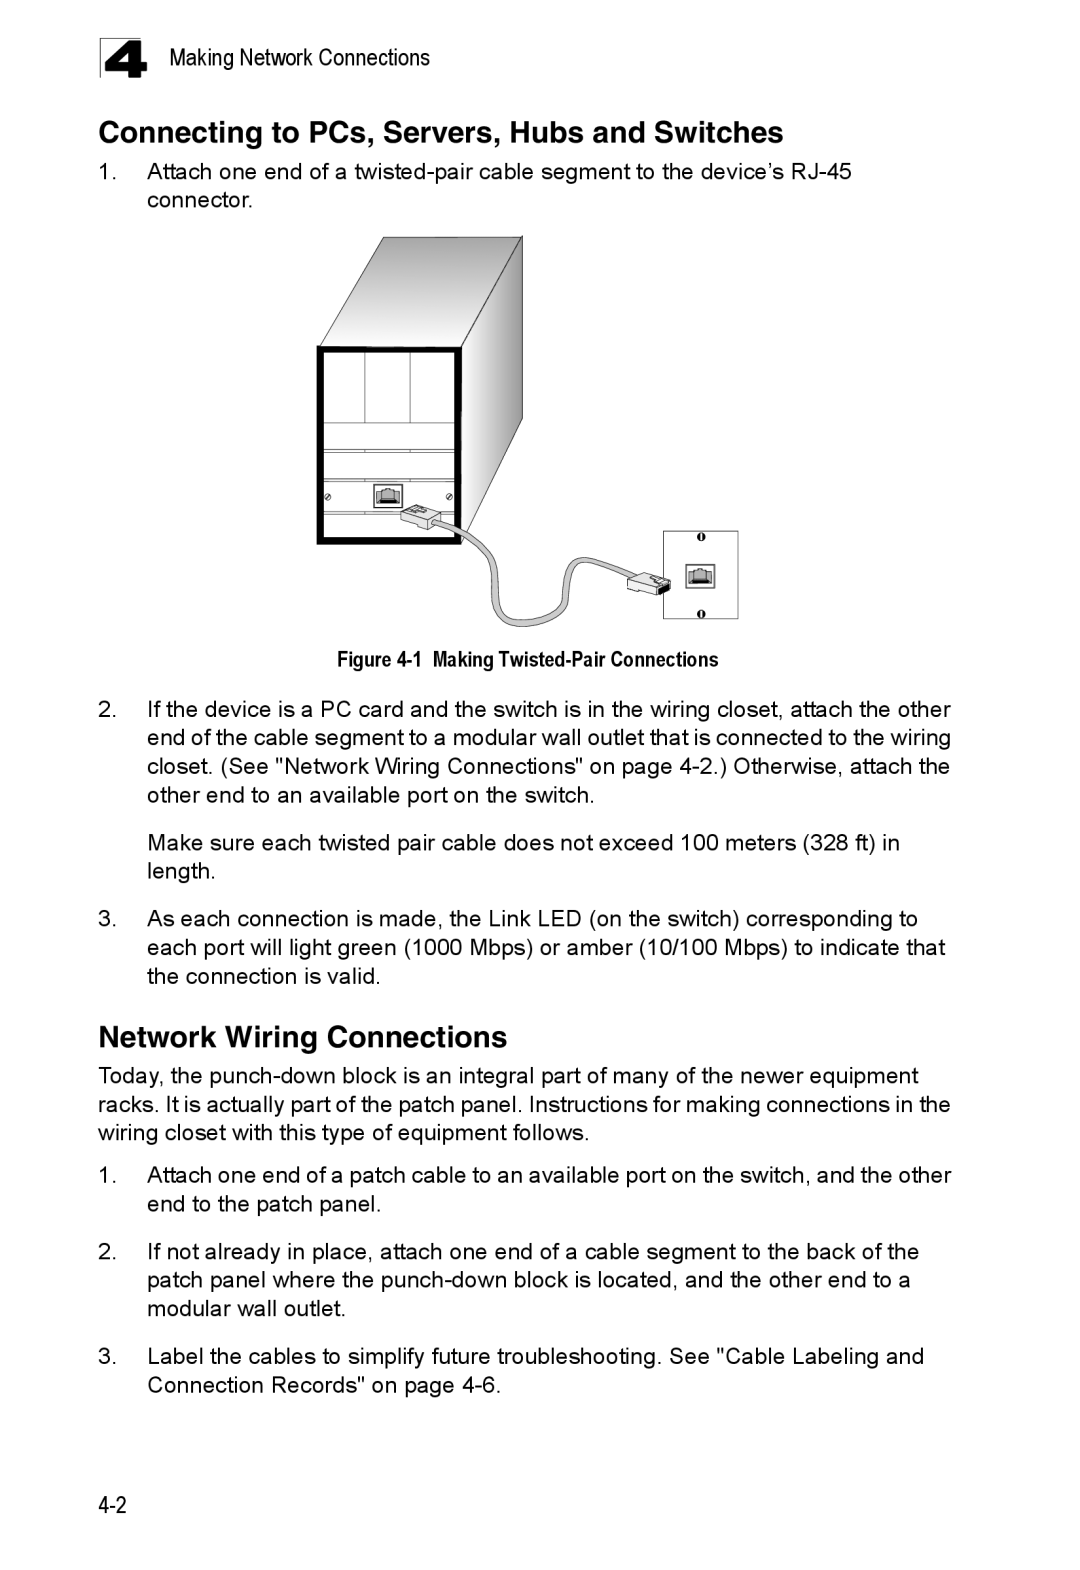 SMC Networks SMC8126PL2-F manual Connecting to PCs, Servers, Hubs and Switches, Network Wiring Connections 